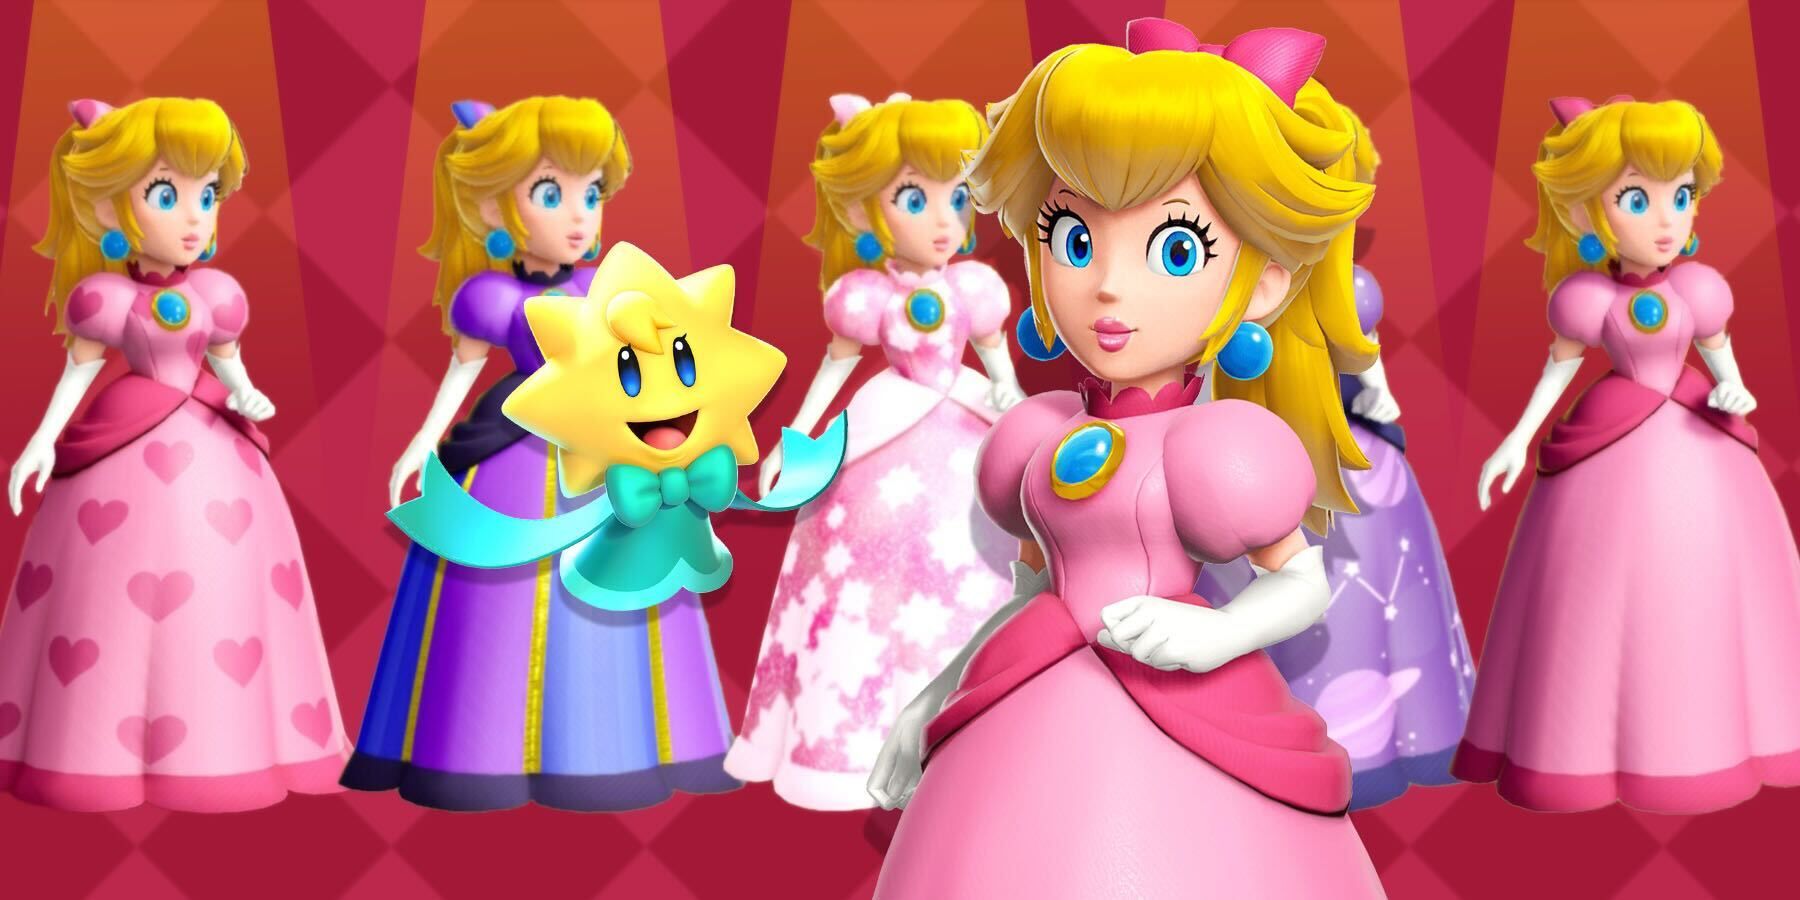 peach and stella different cosmetic outfits